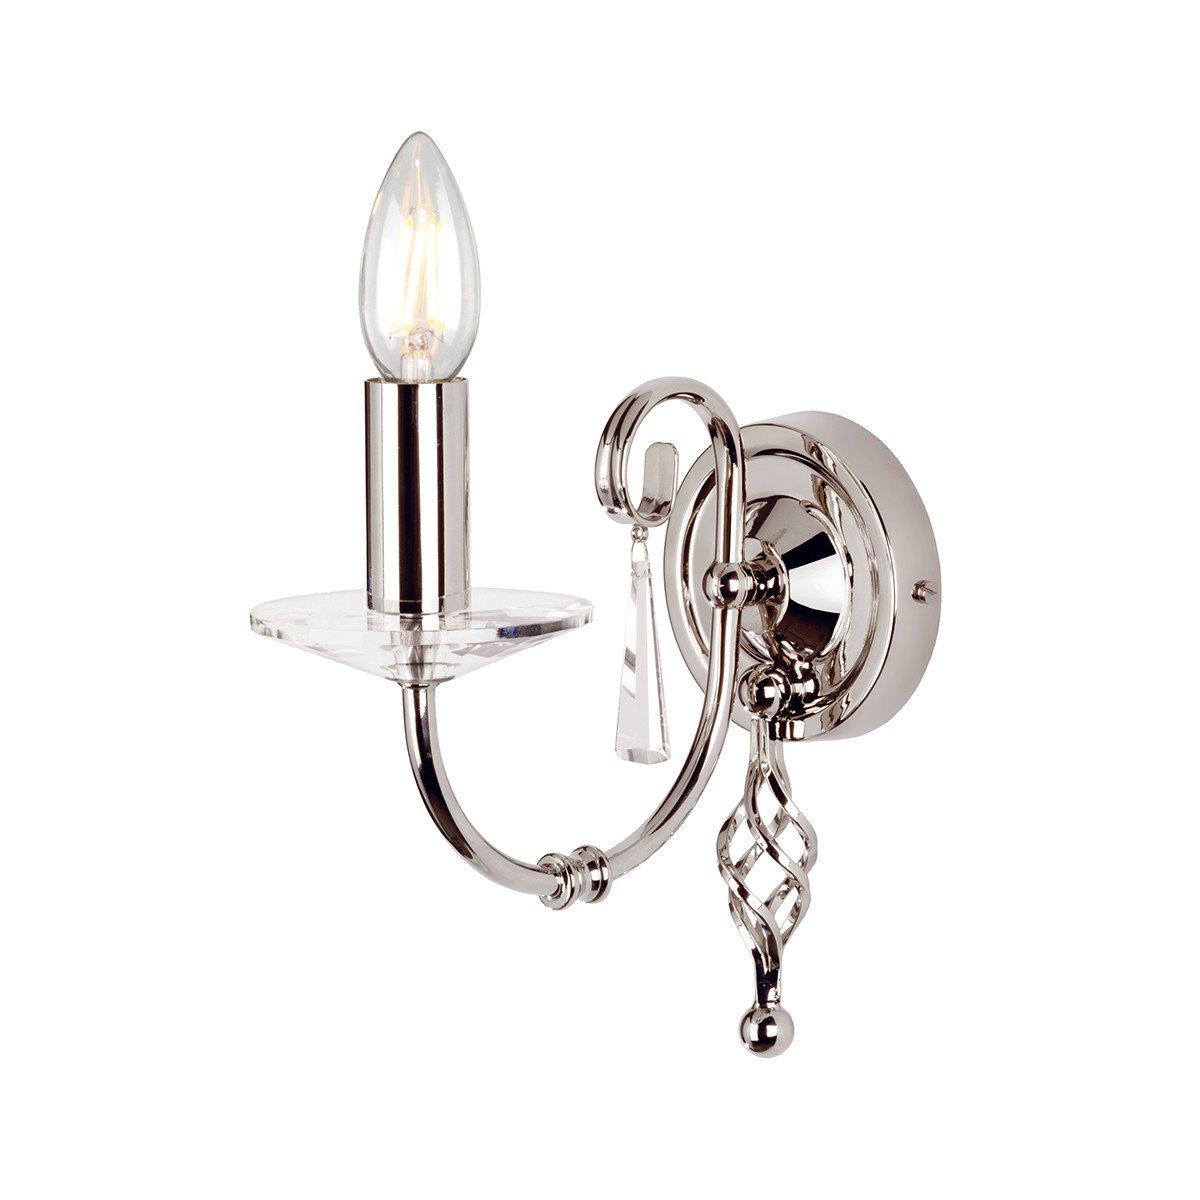 Aegean 1 Light Indoor Candle Wall Light Polished Nickel E14